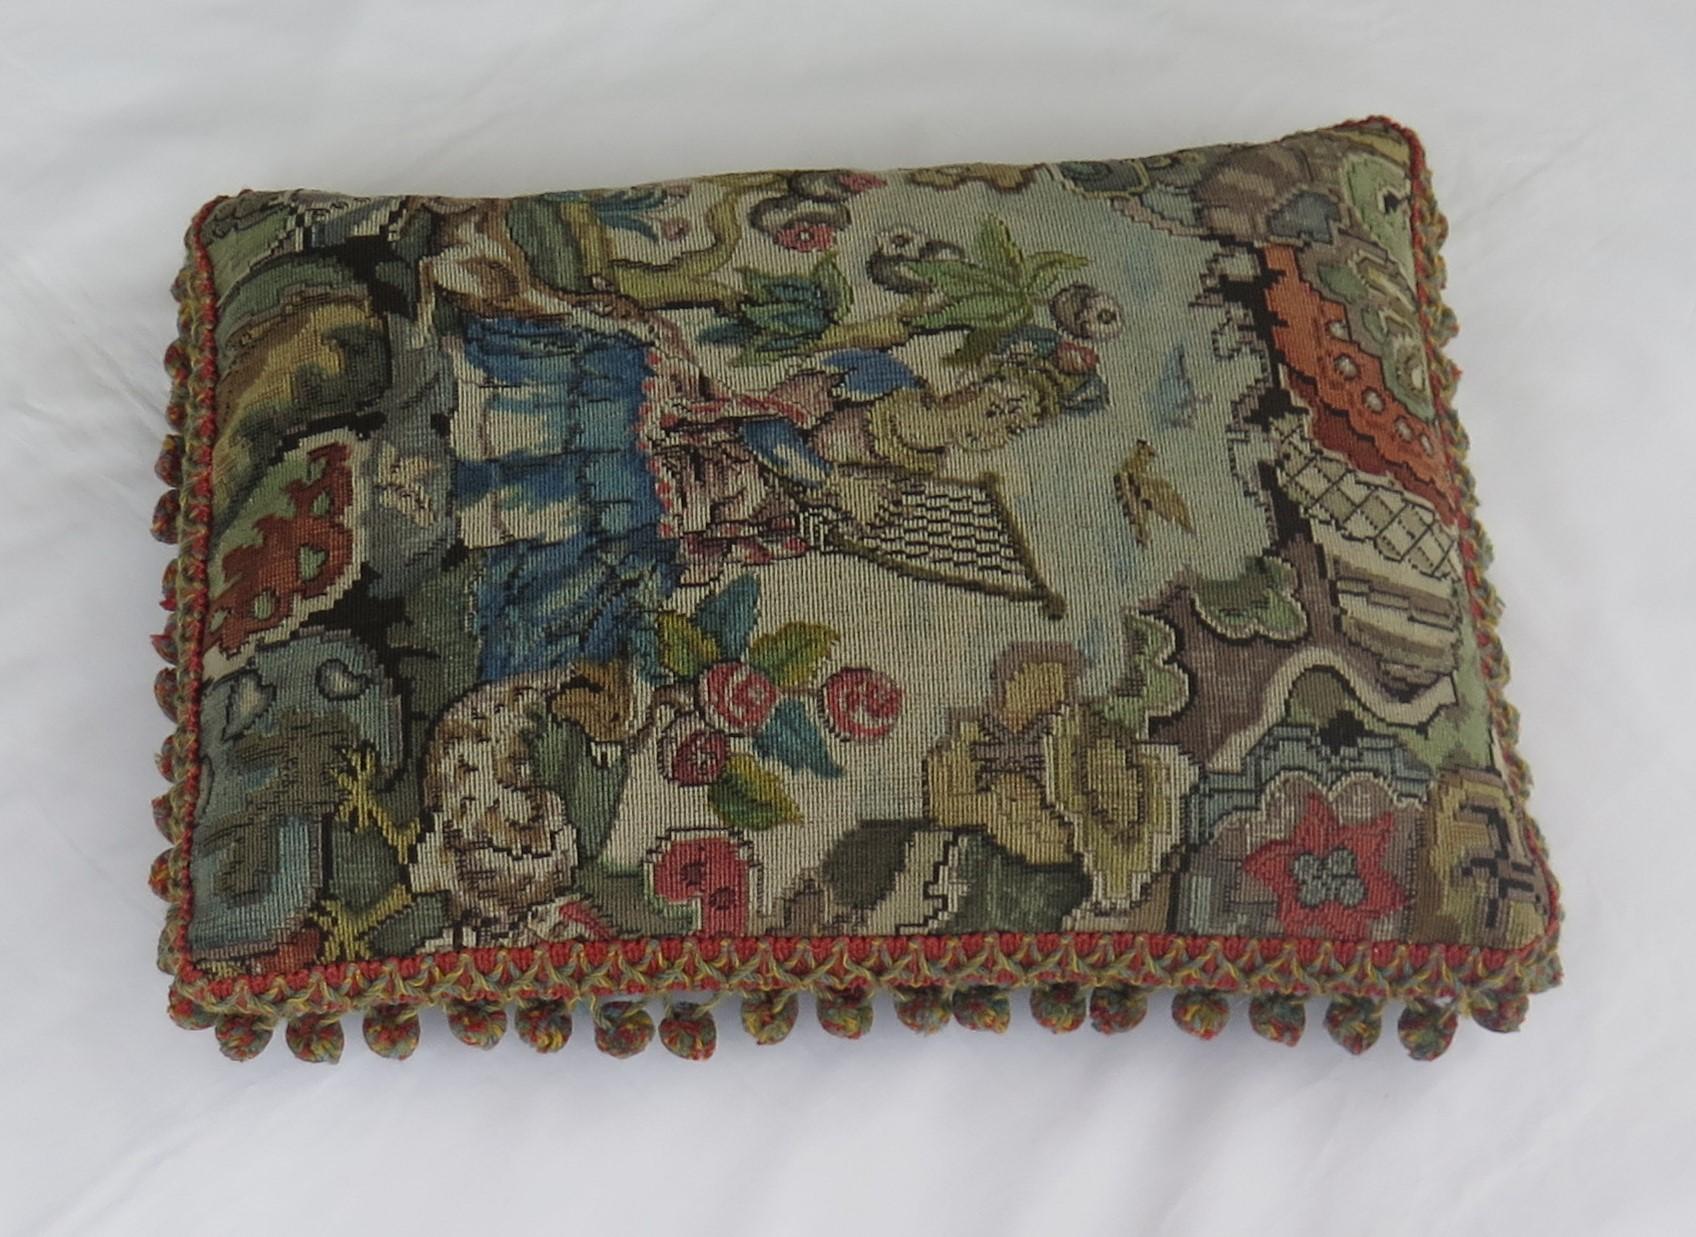 Woven Tapestry Cushion or Pillow in Aubusson style, French, 19th Century 2